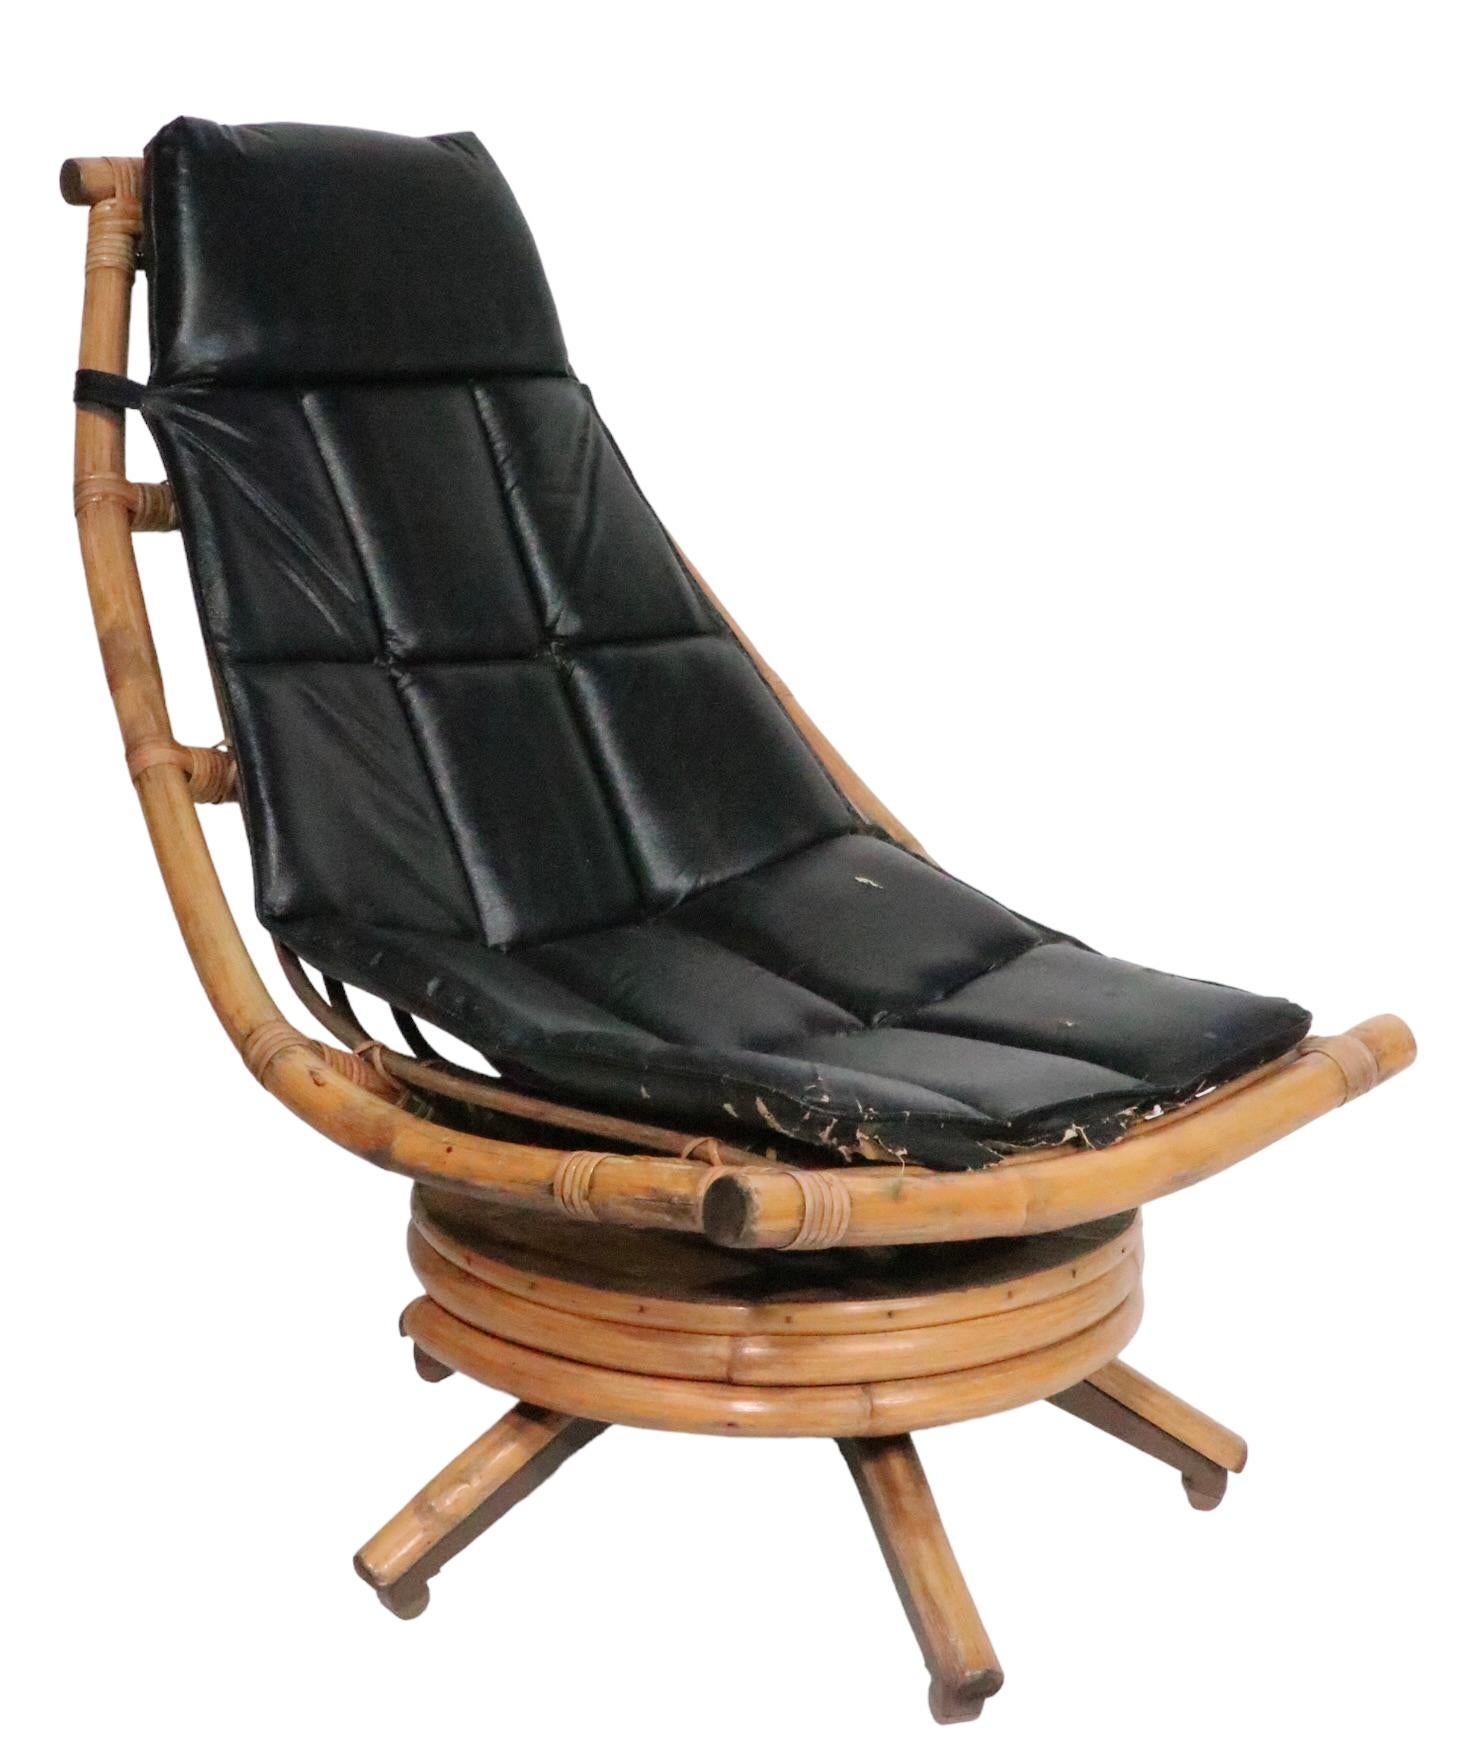 Midcentury Swivel Tilt Bamboo Lounge Chaise Chair, circa 1950/ 1960s For Sale 6